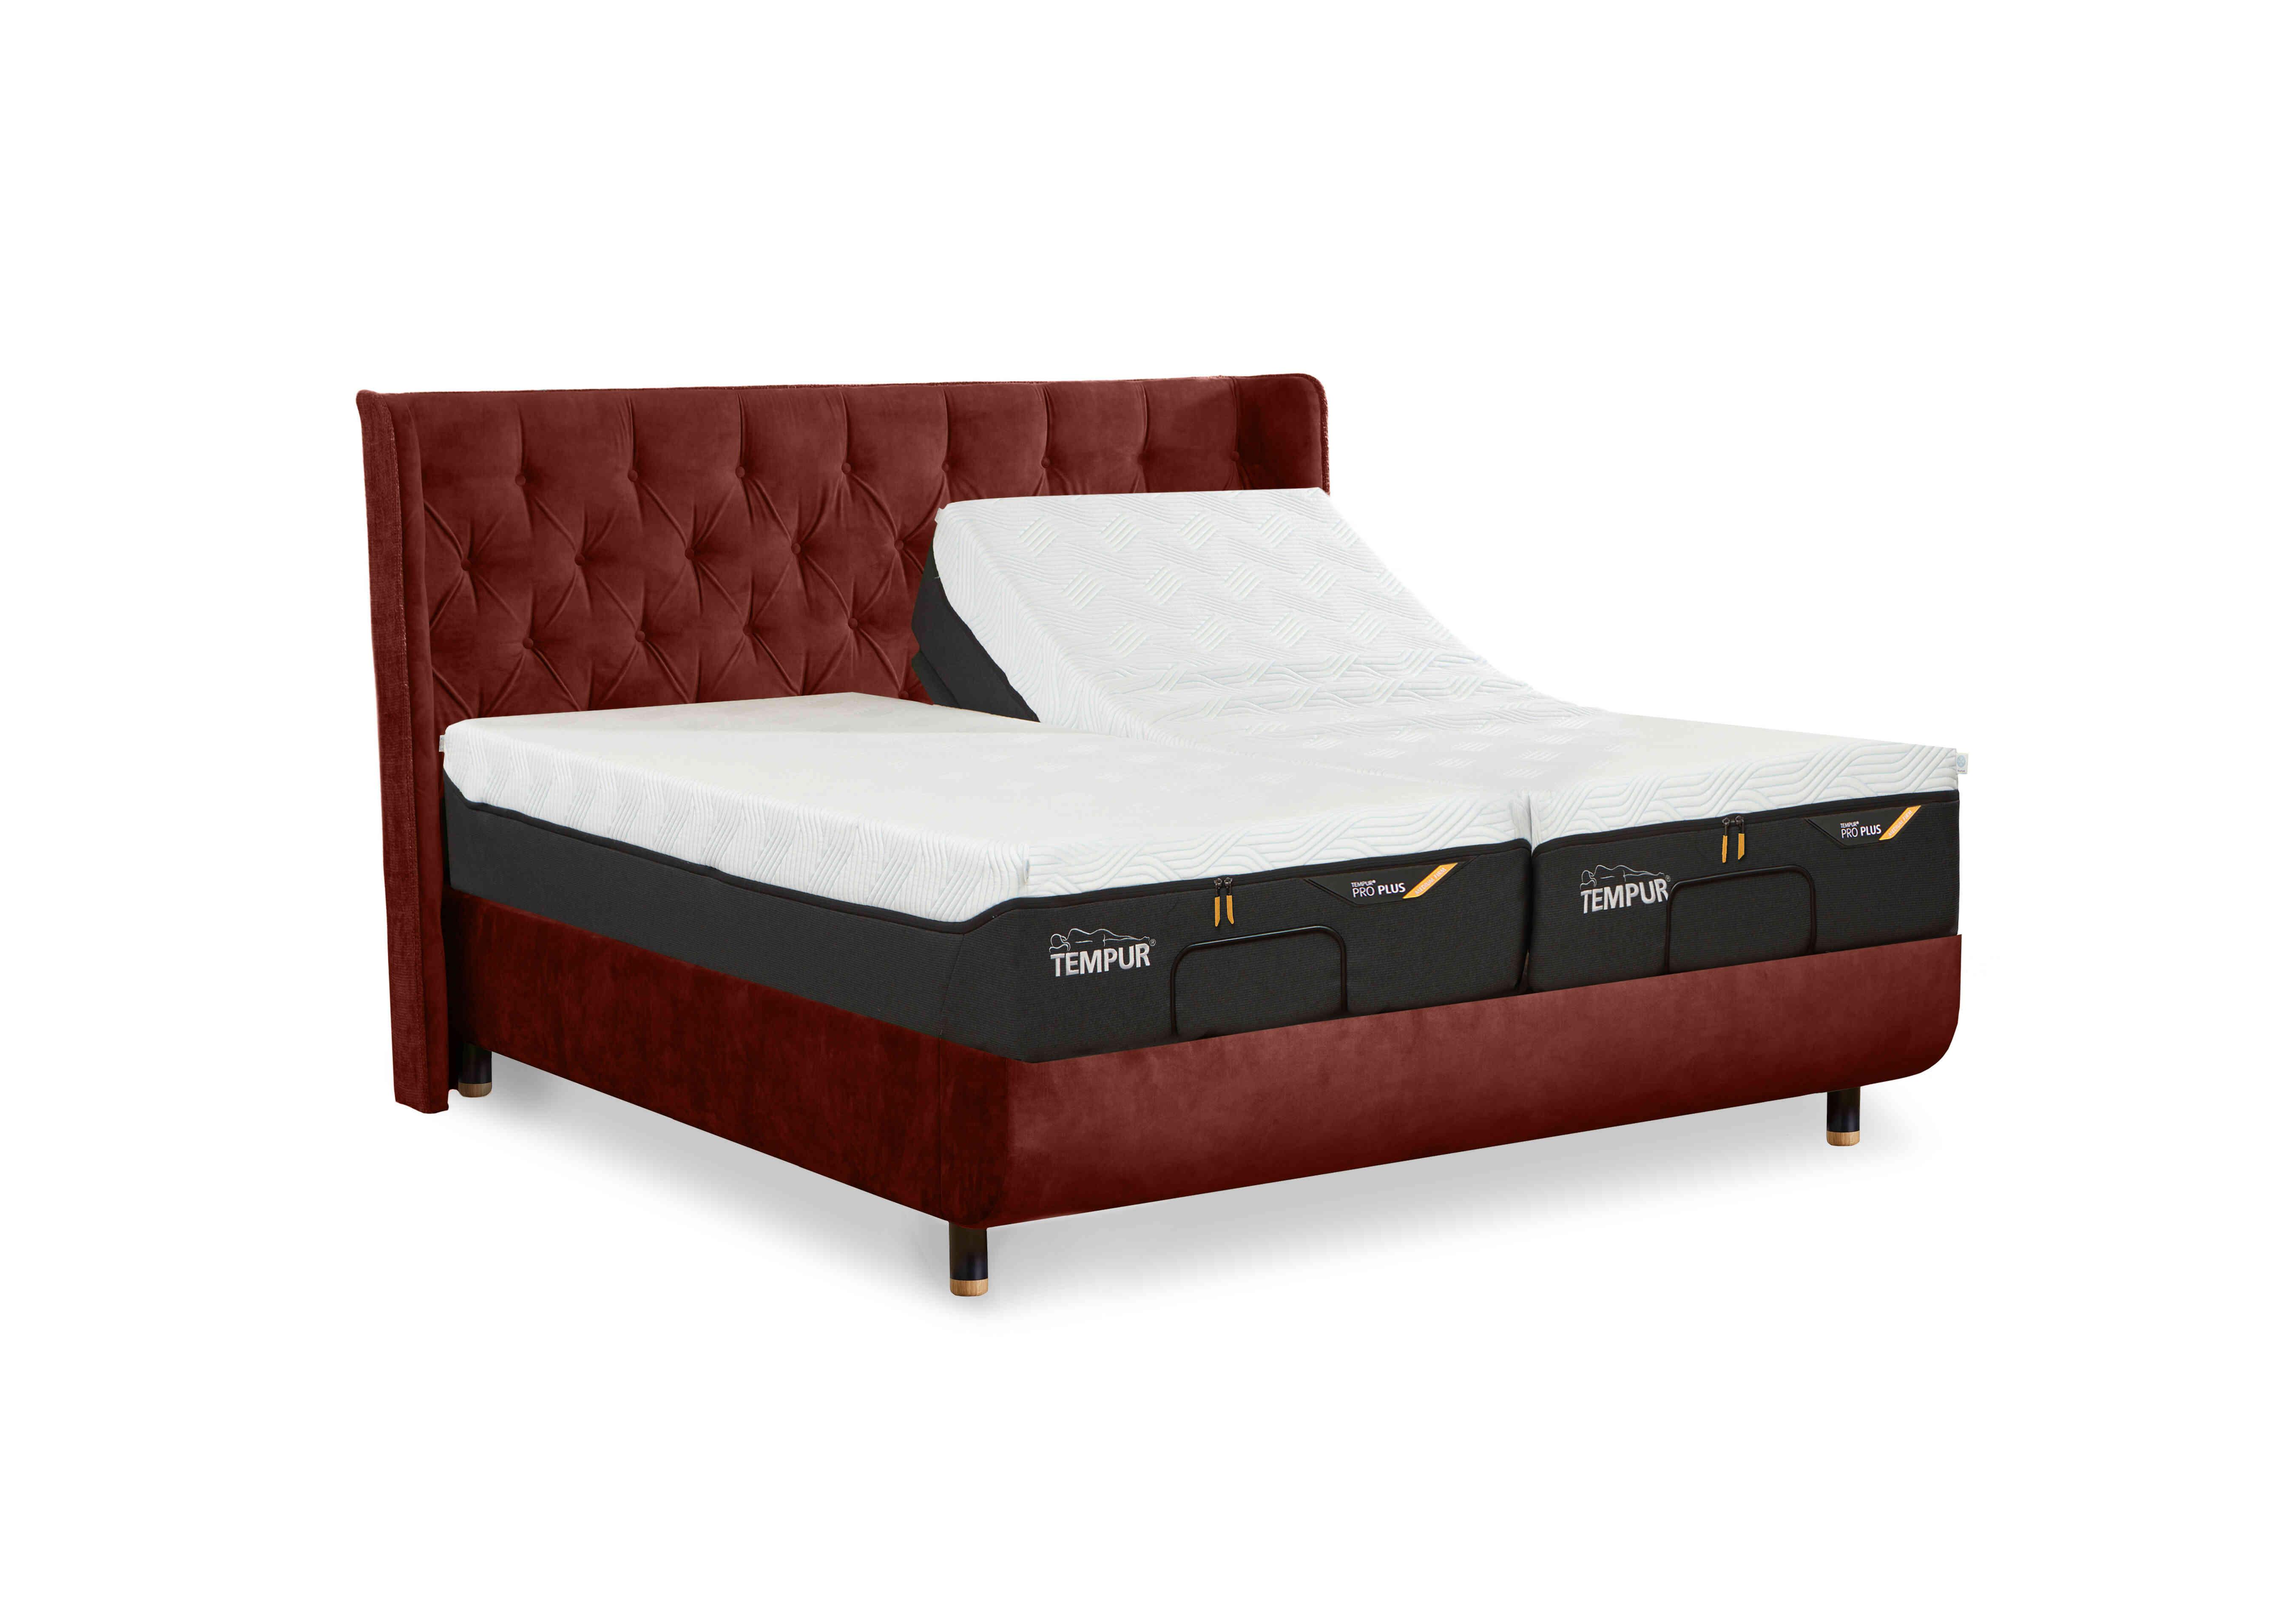 Arc Ergo Smart Base Bed Frame with Luxury Headboard in Copper/Copper Red-Nat Ash Ft on Furniture Village